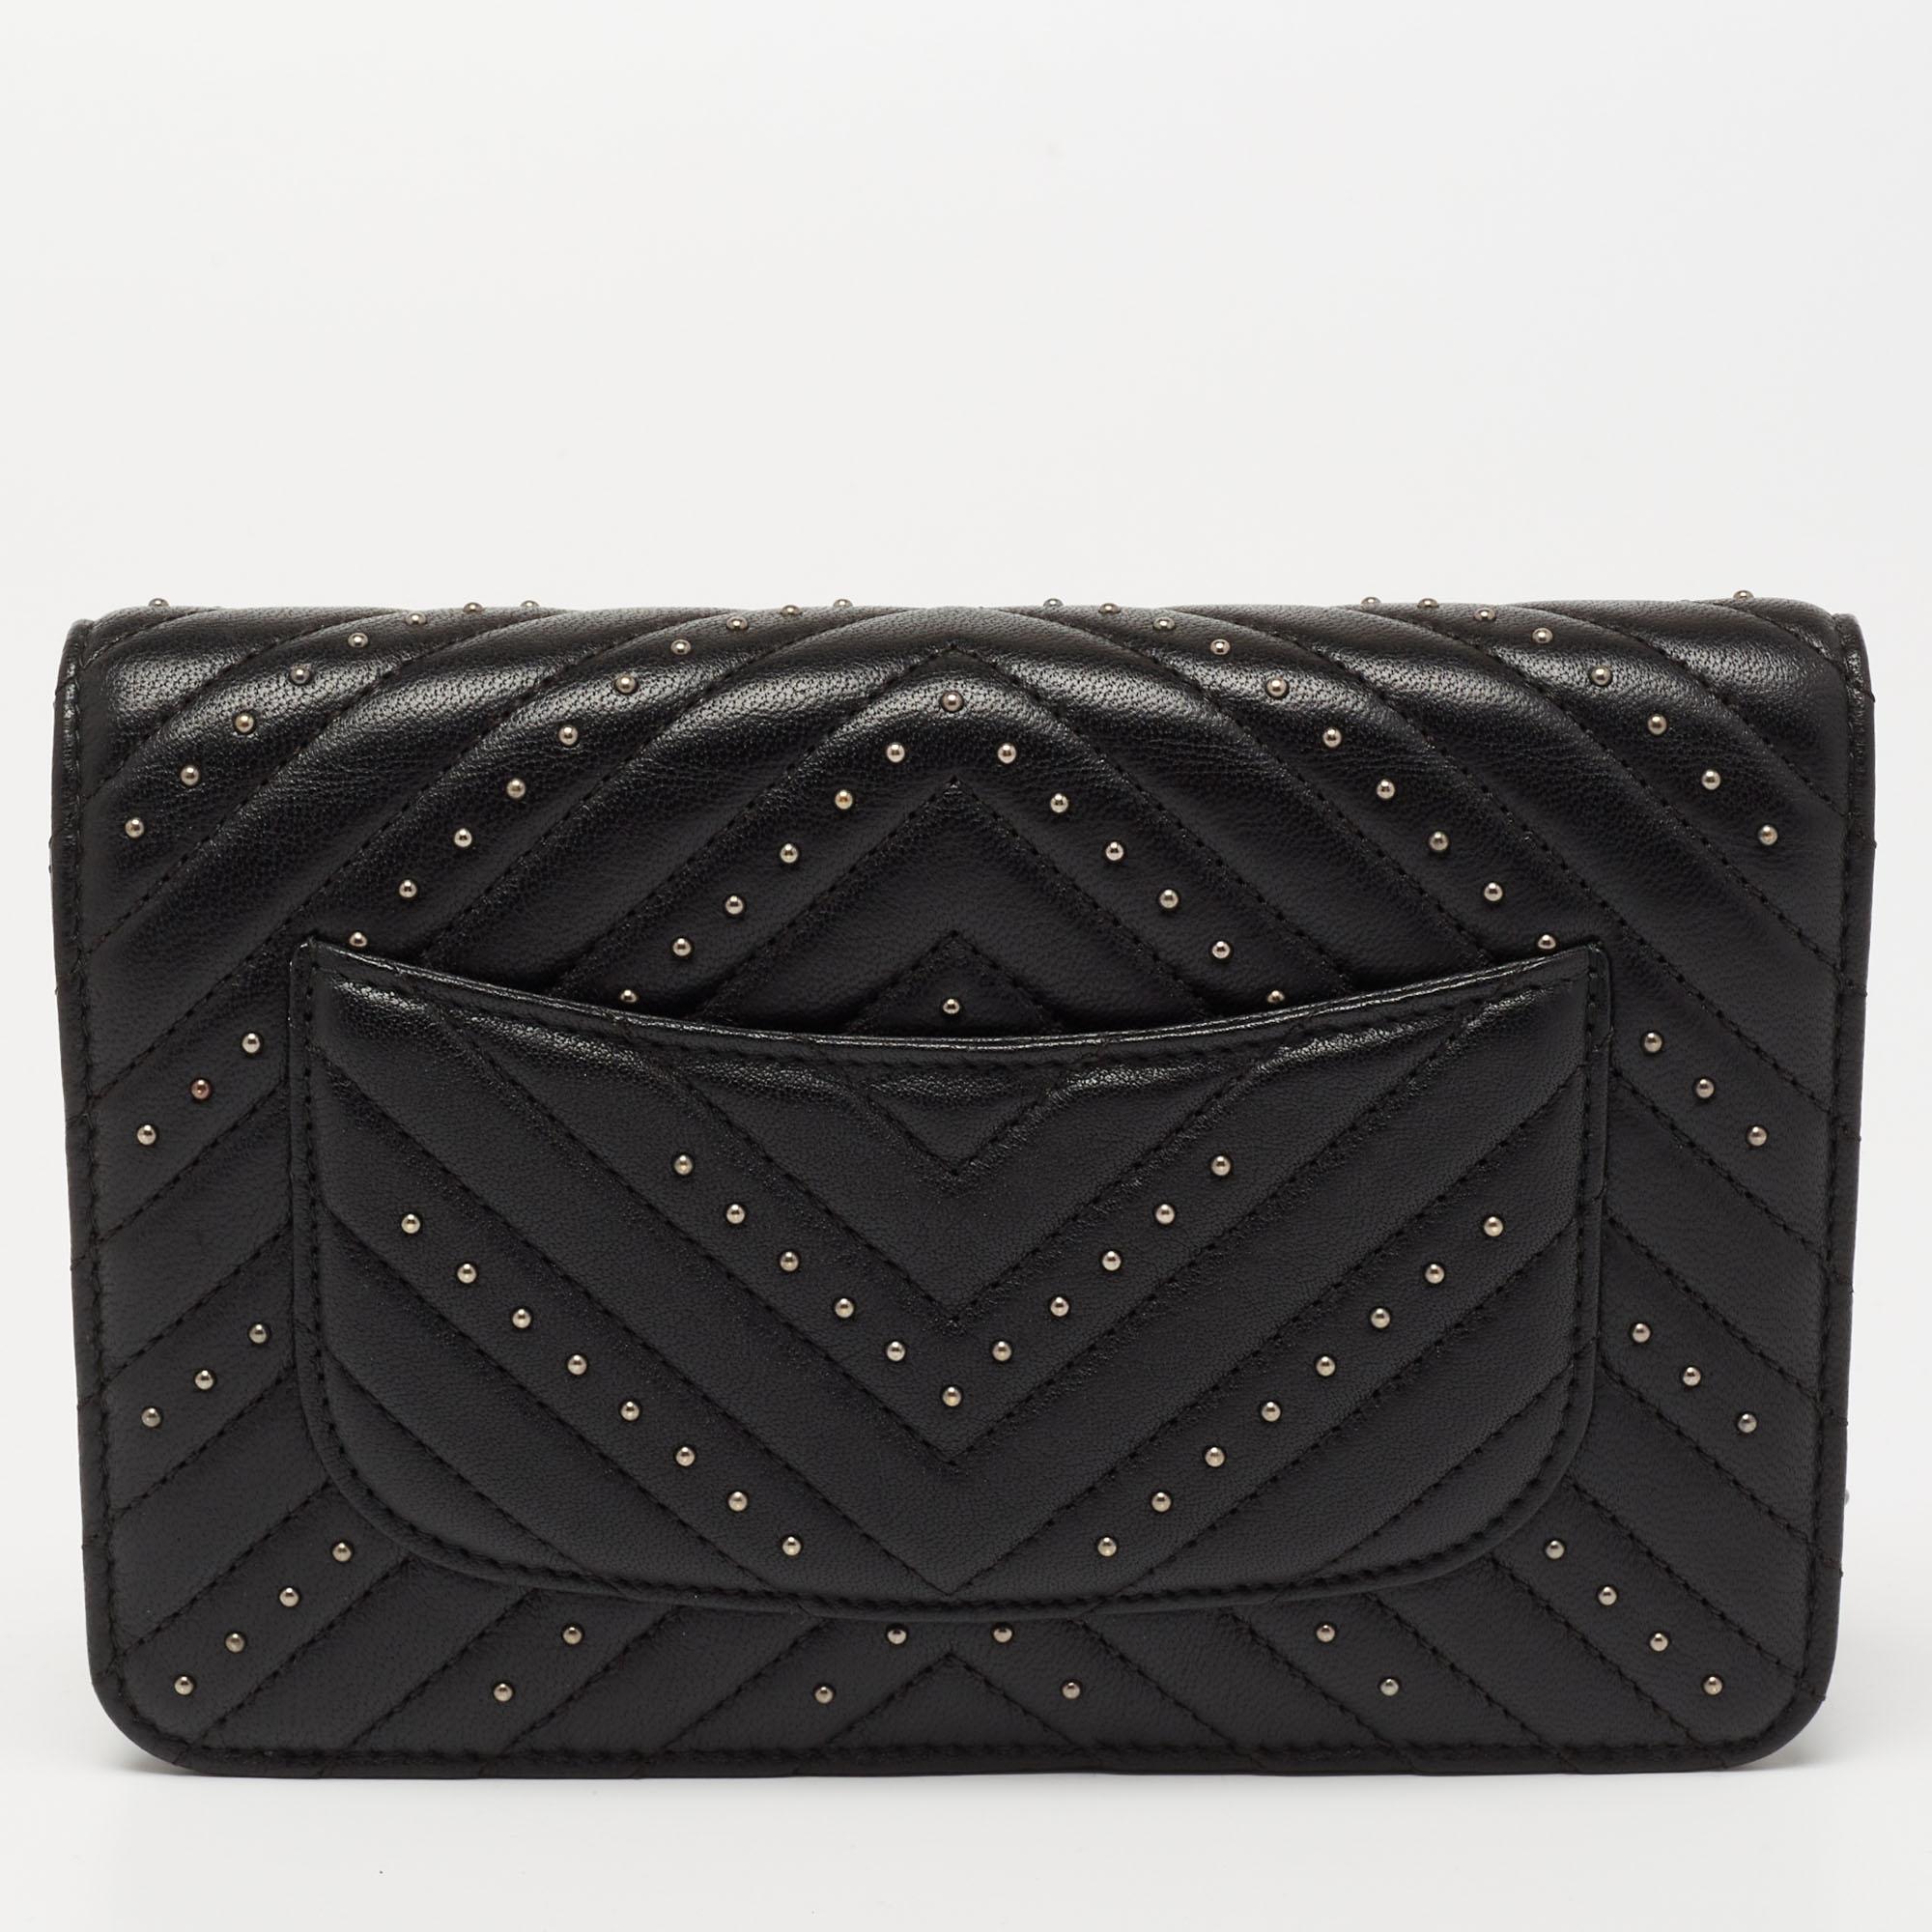 All of Chanel's designs are made with high attention to style and craftsmanship. This wallet-on-chain has been created from leather and is covered in chevron quilts. It features a turn lock on the flap and opens to reveal an interior with multiple